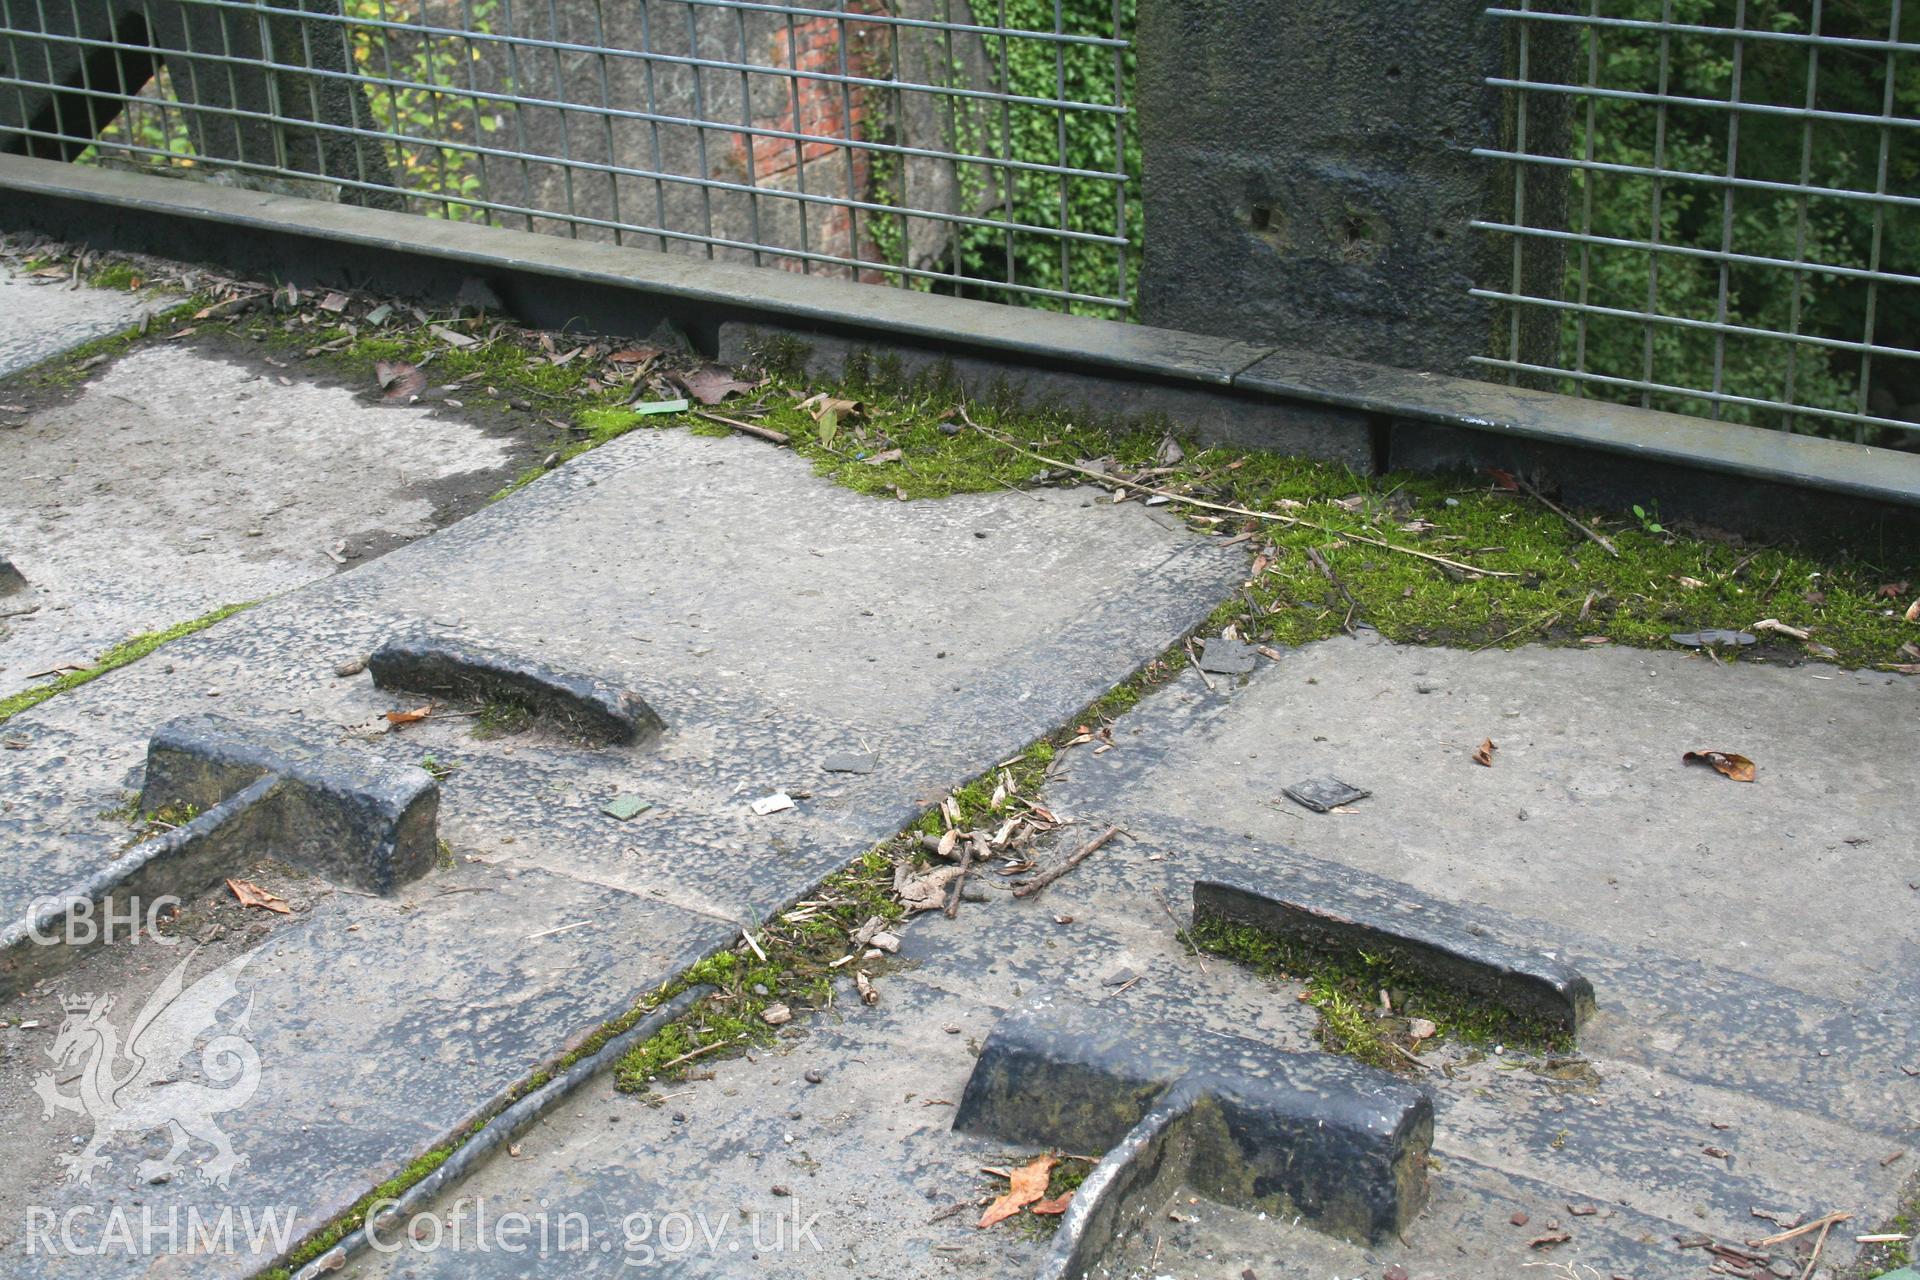 View of tramway plates.